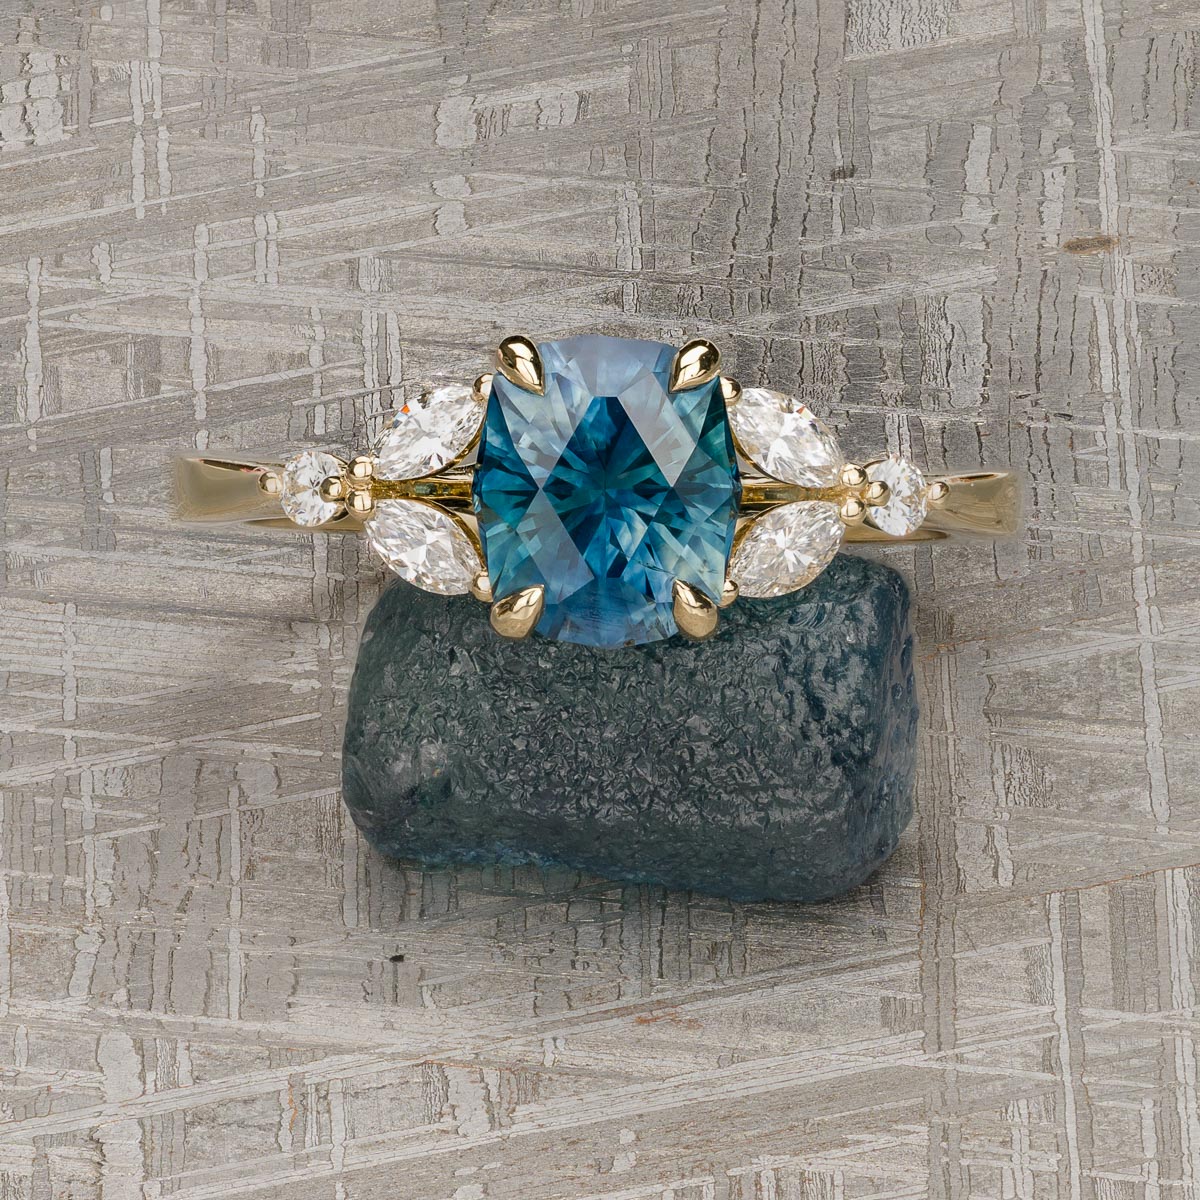 The "Cattleya" in 14k yellow gold with 2.22-Carat Montana Sapphire